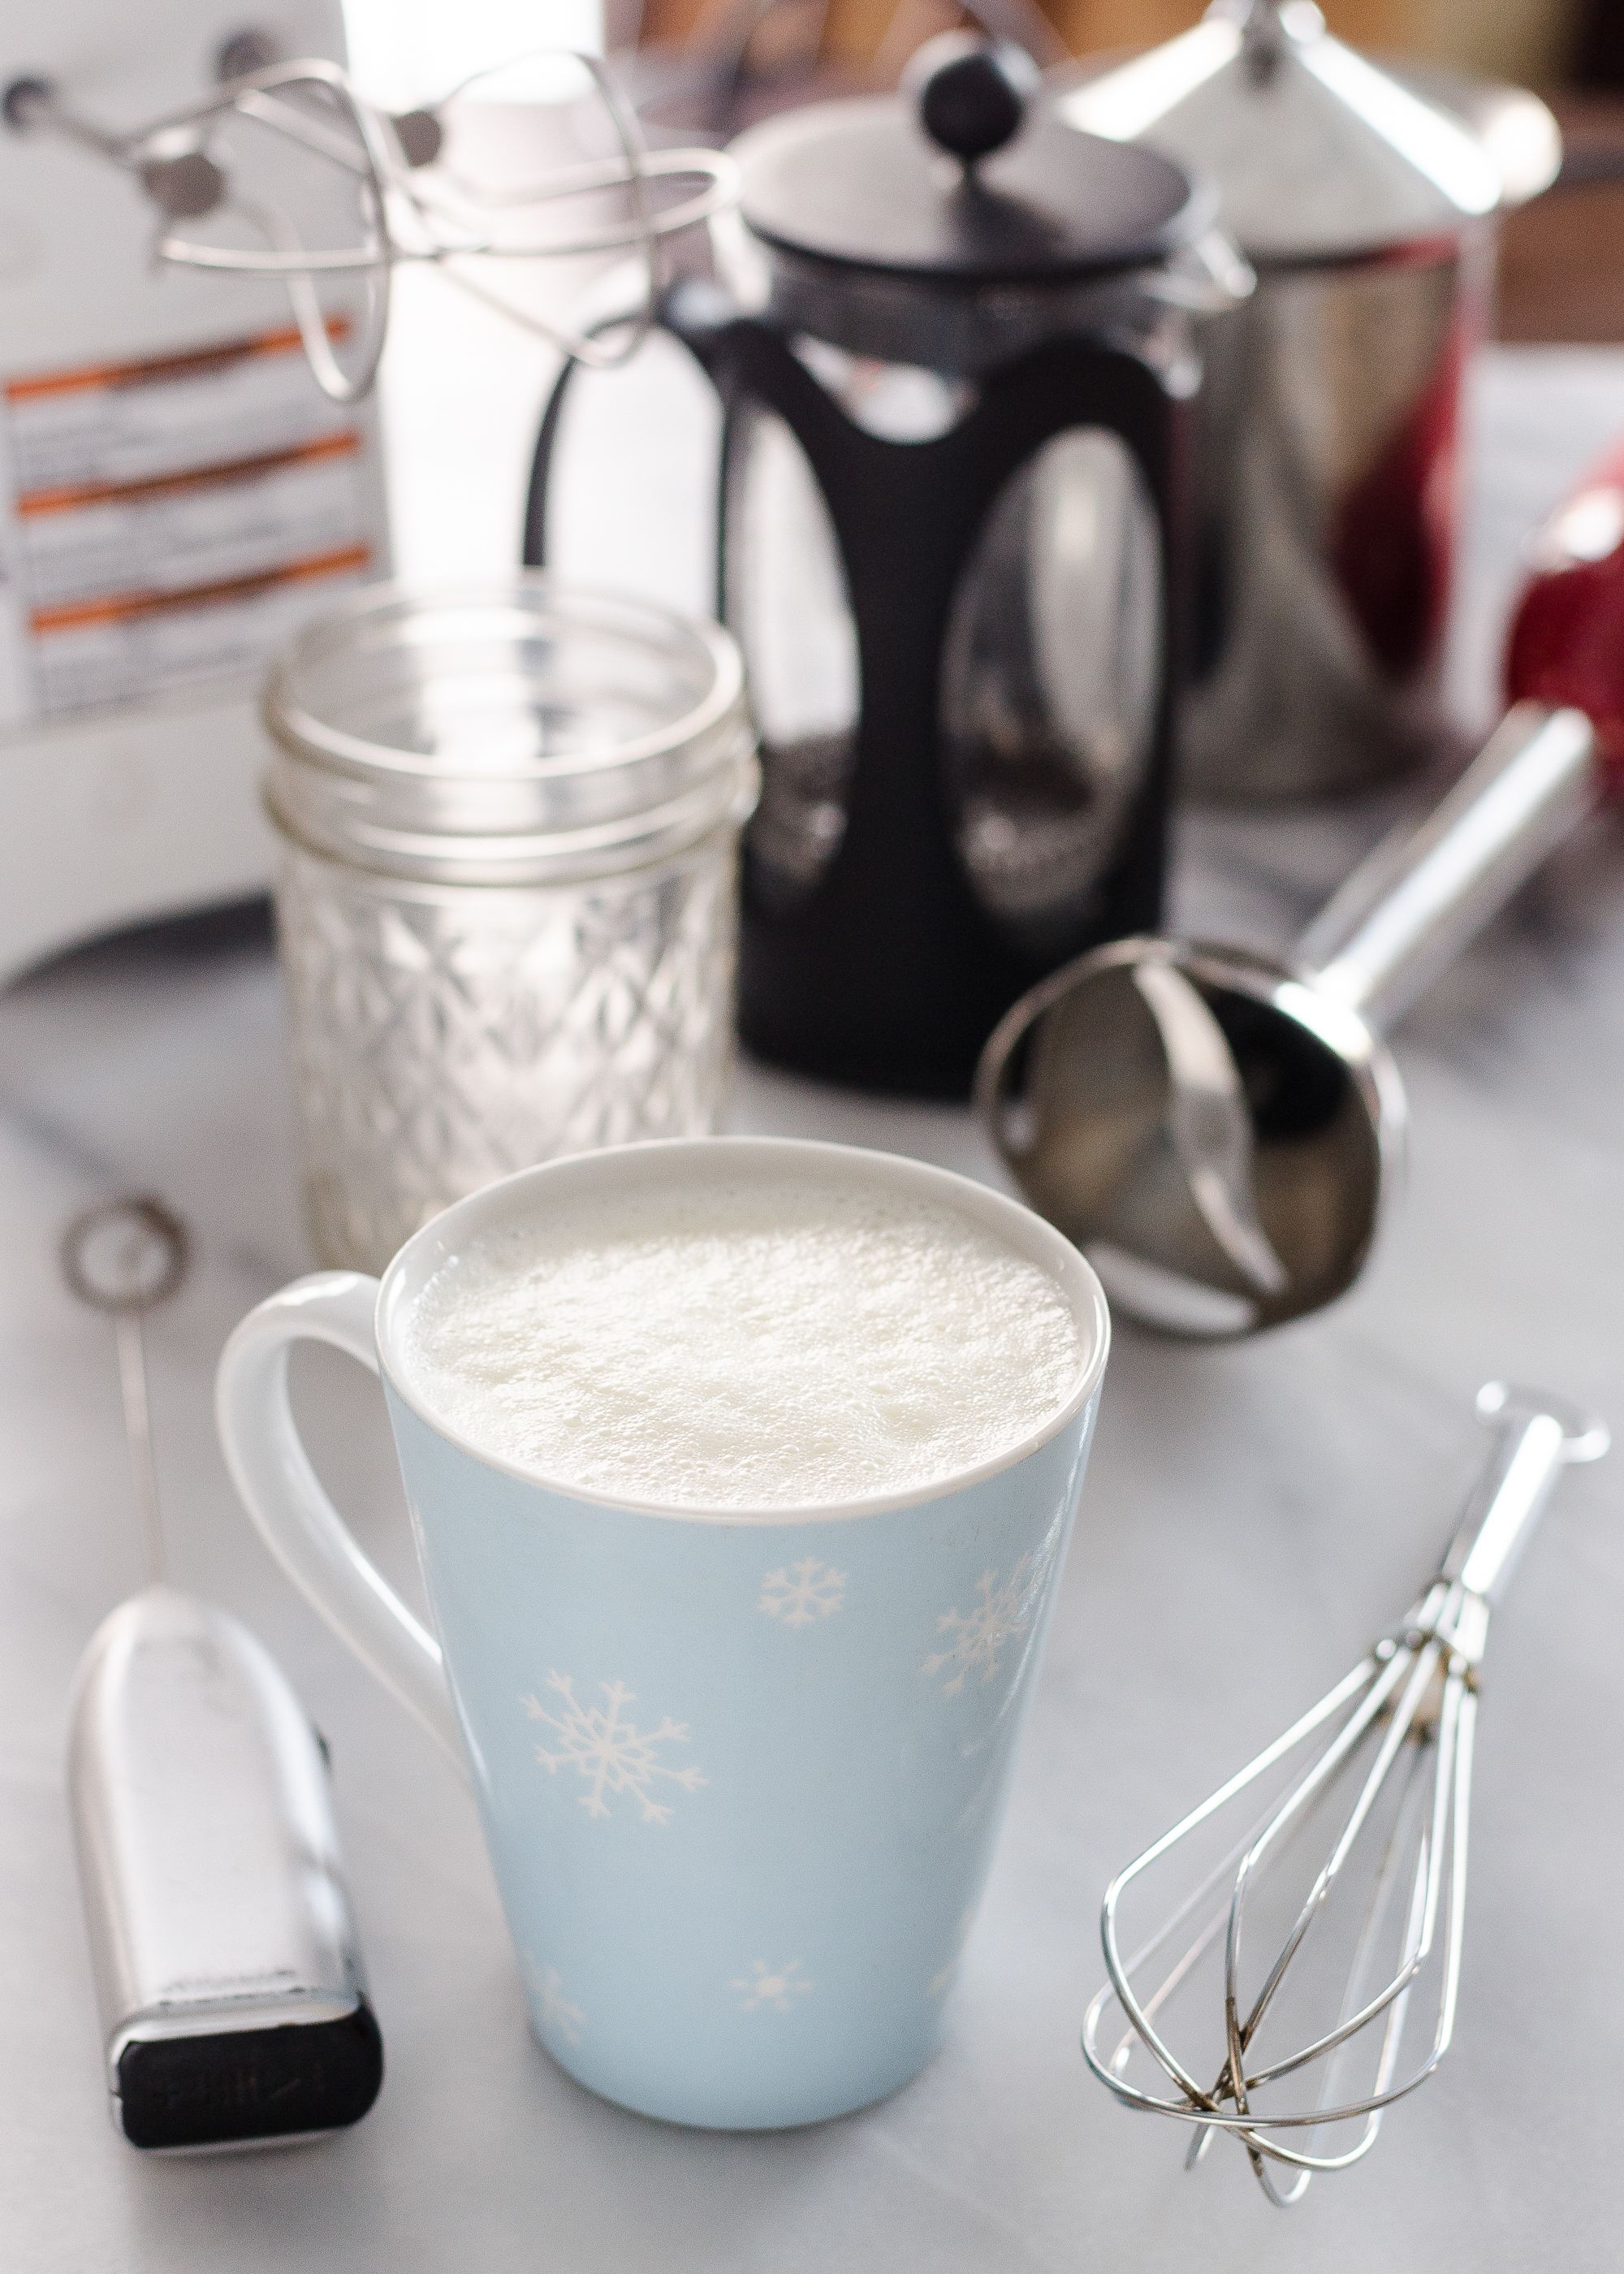 How to Froth Milk at Home